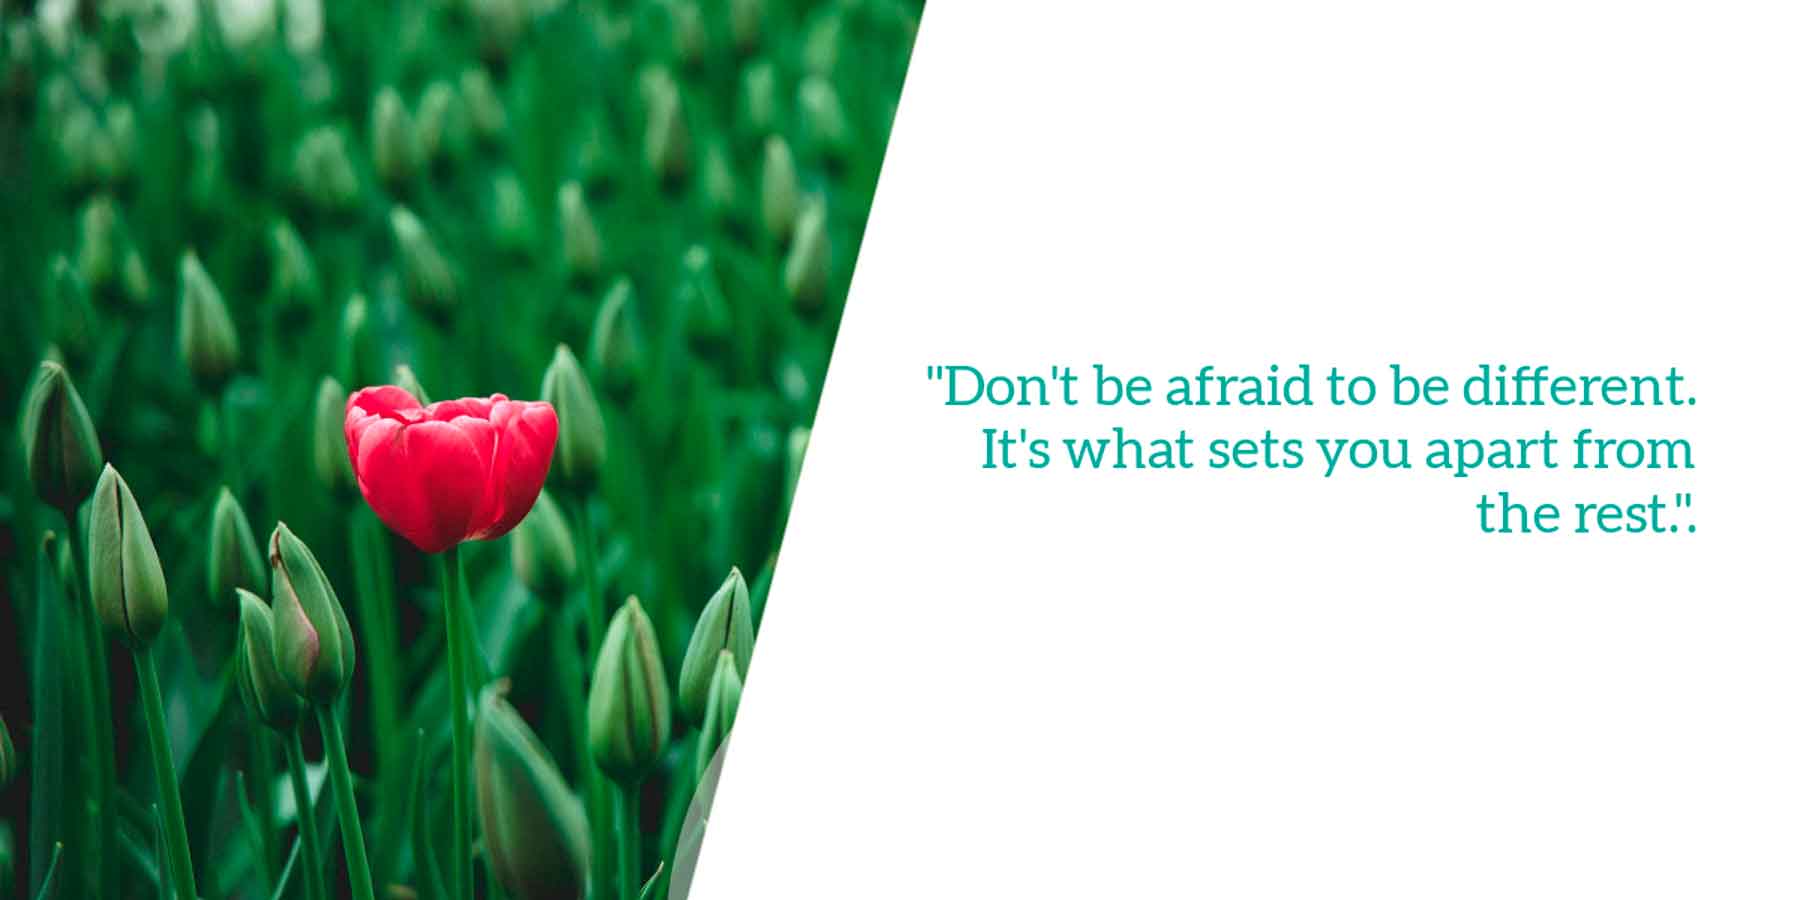 Don't be afraid to be different. It's what sets you apart from the rest